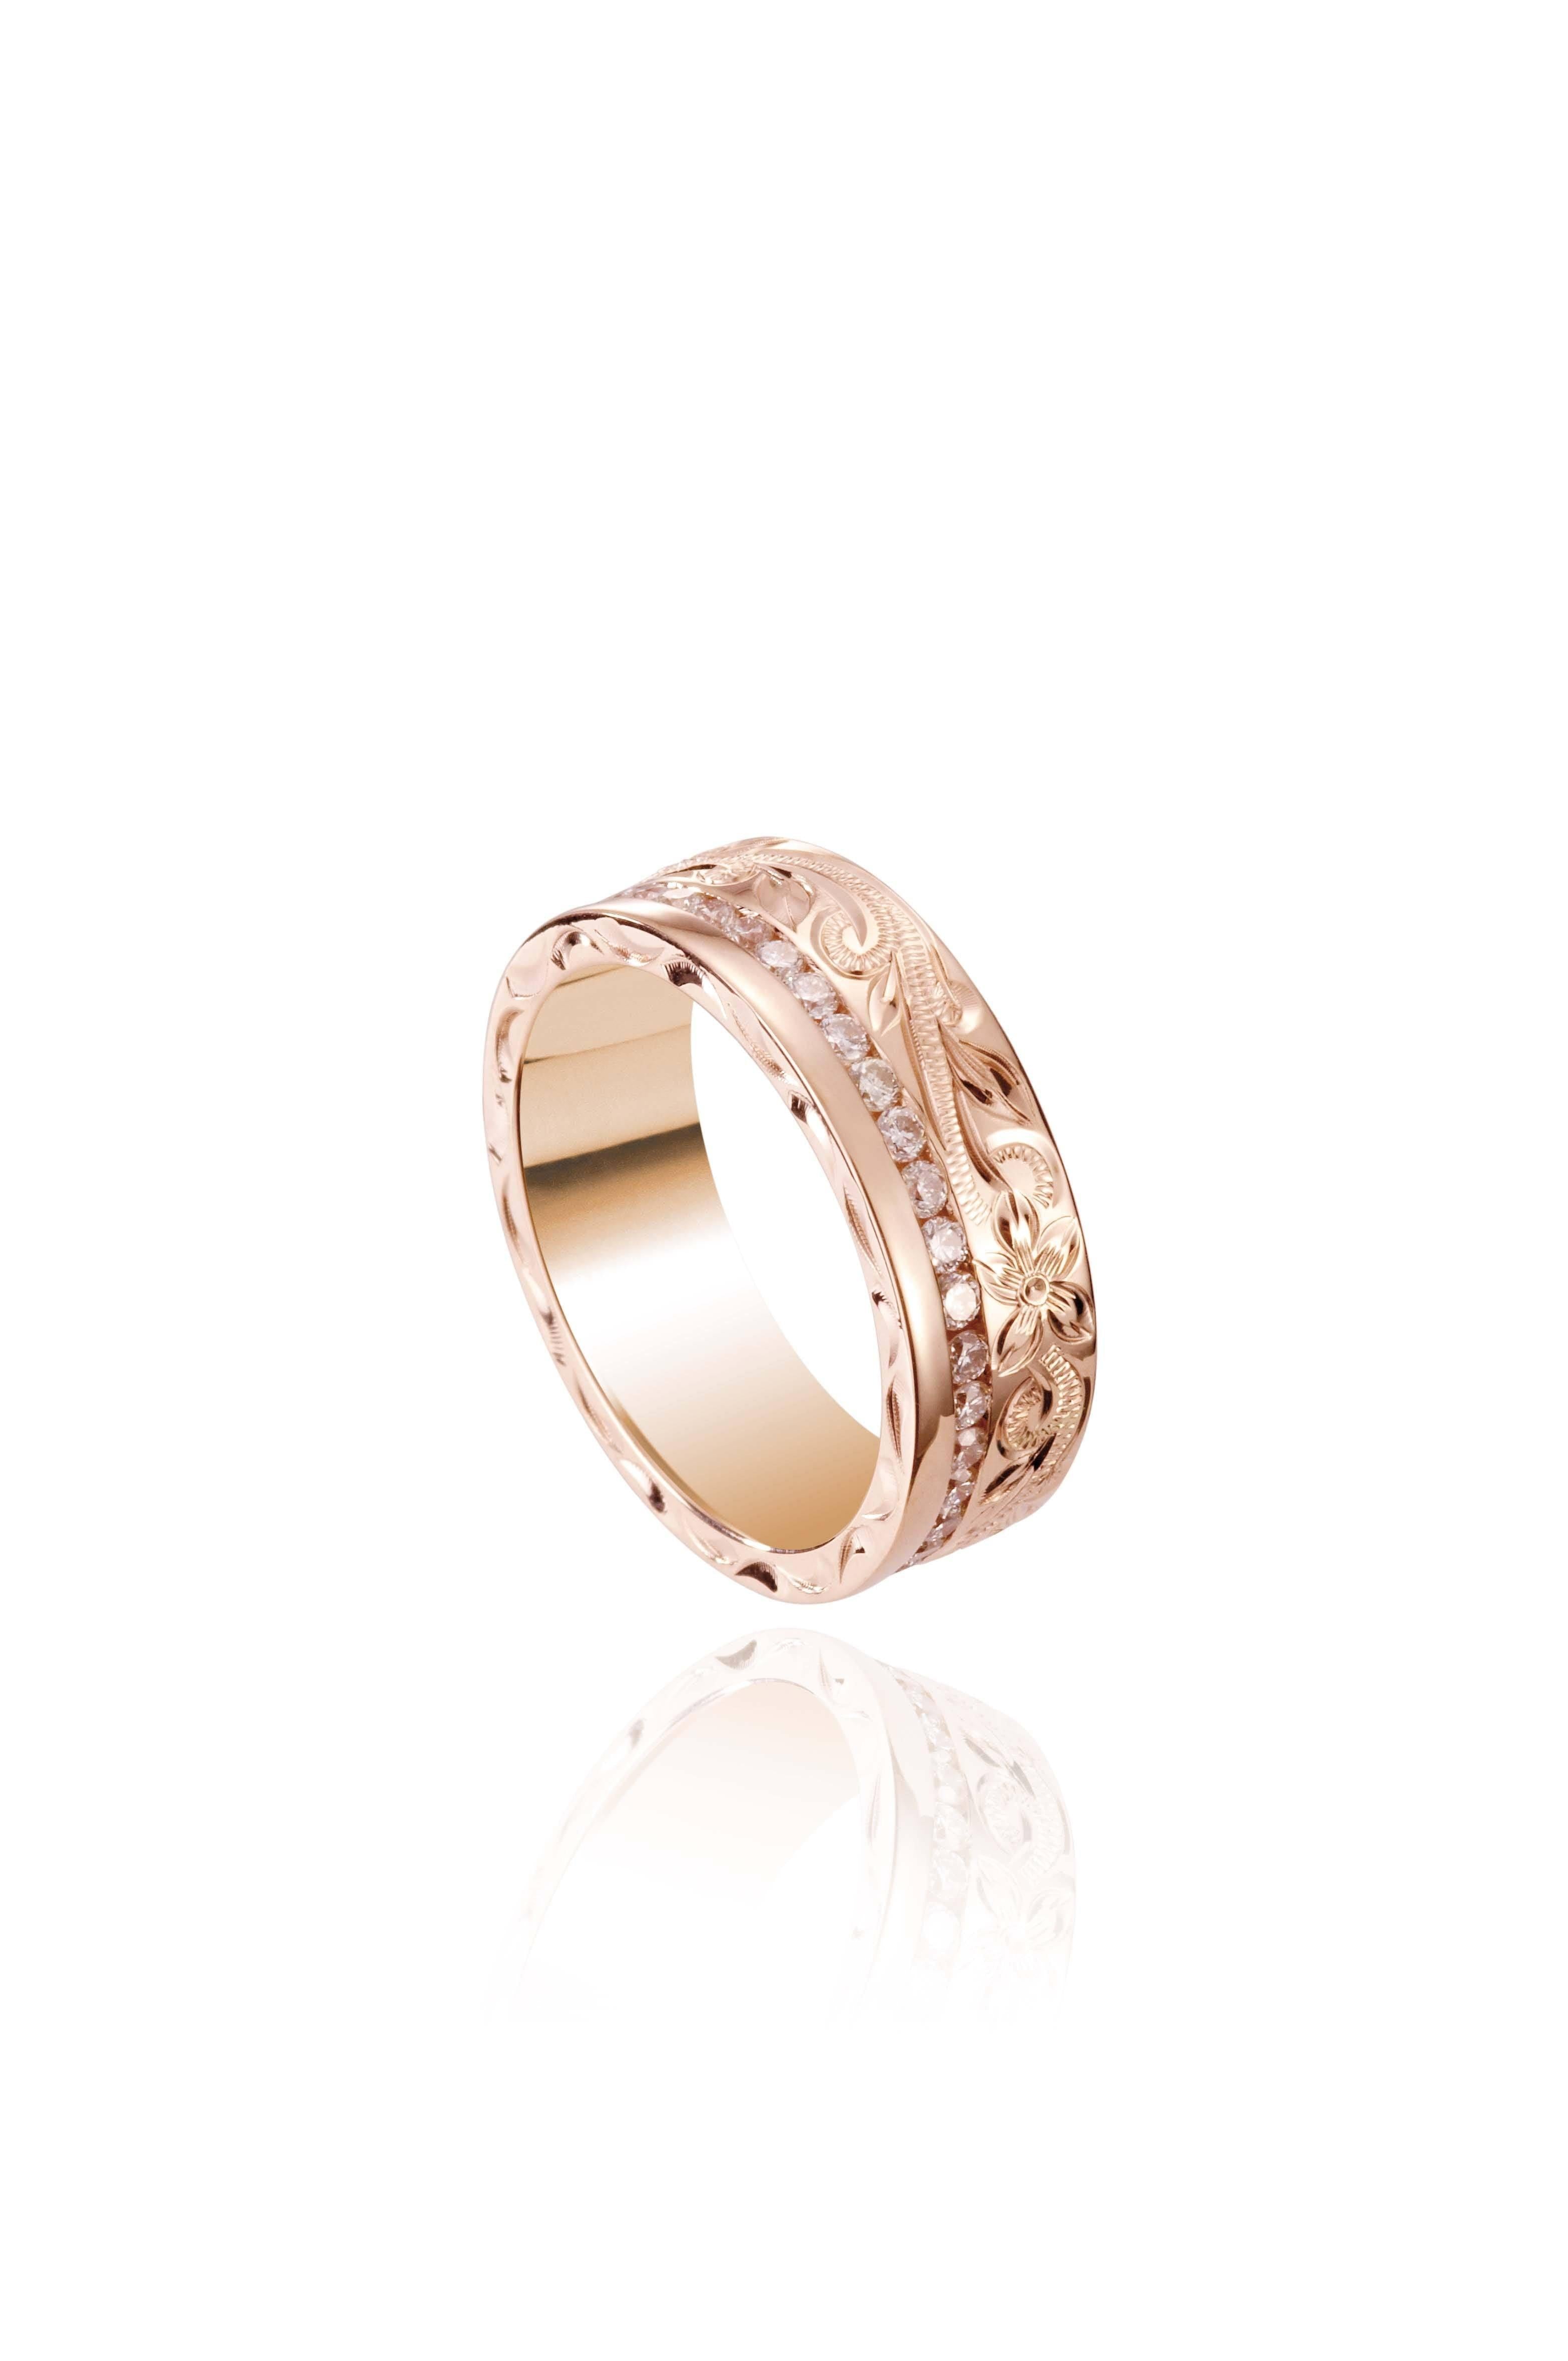 In this photo there is a rose gold ring with diamonds and hand engravings that include a flower and scroll.